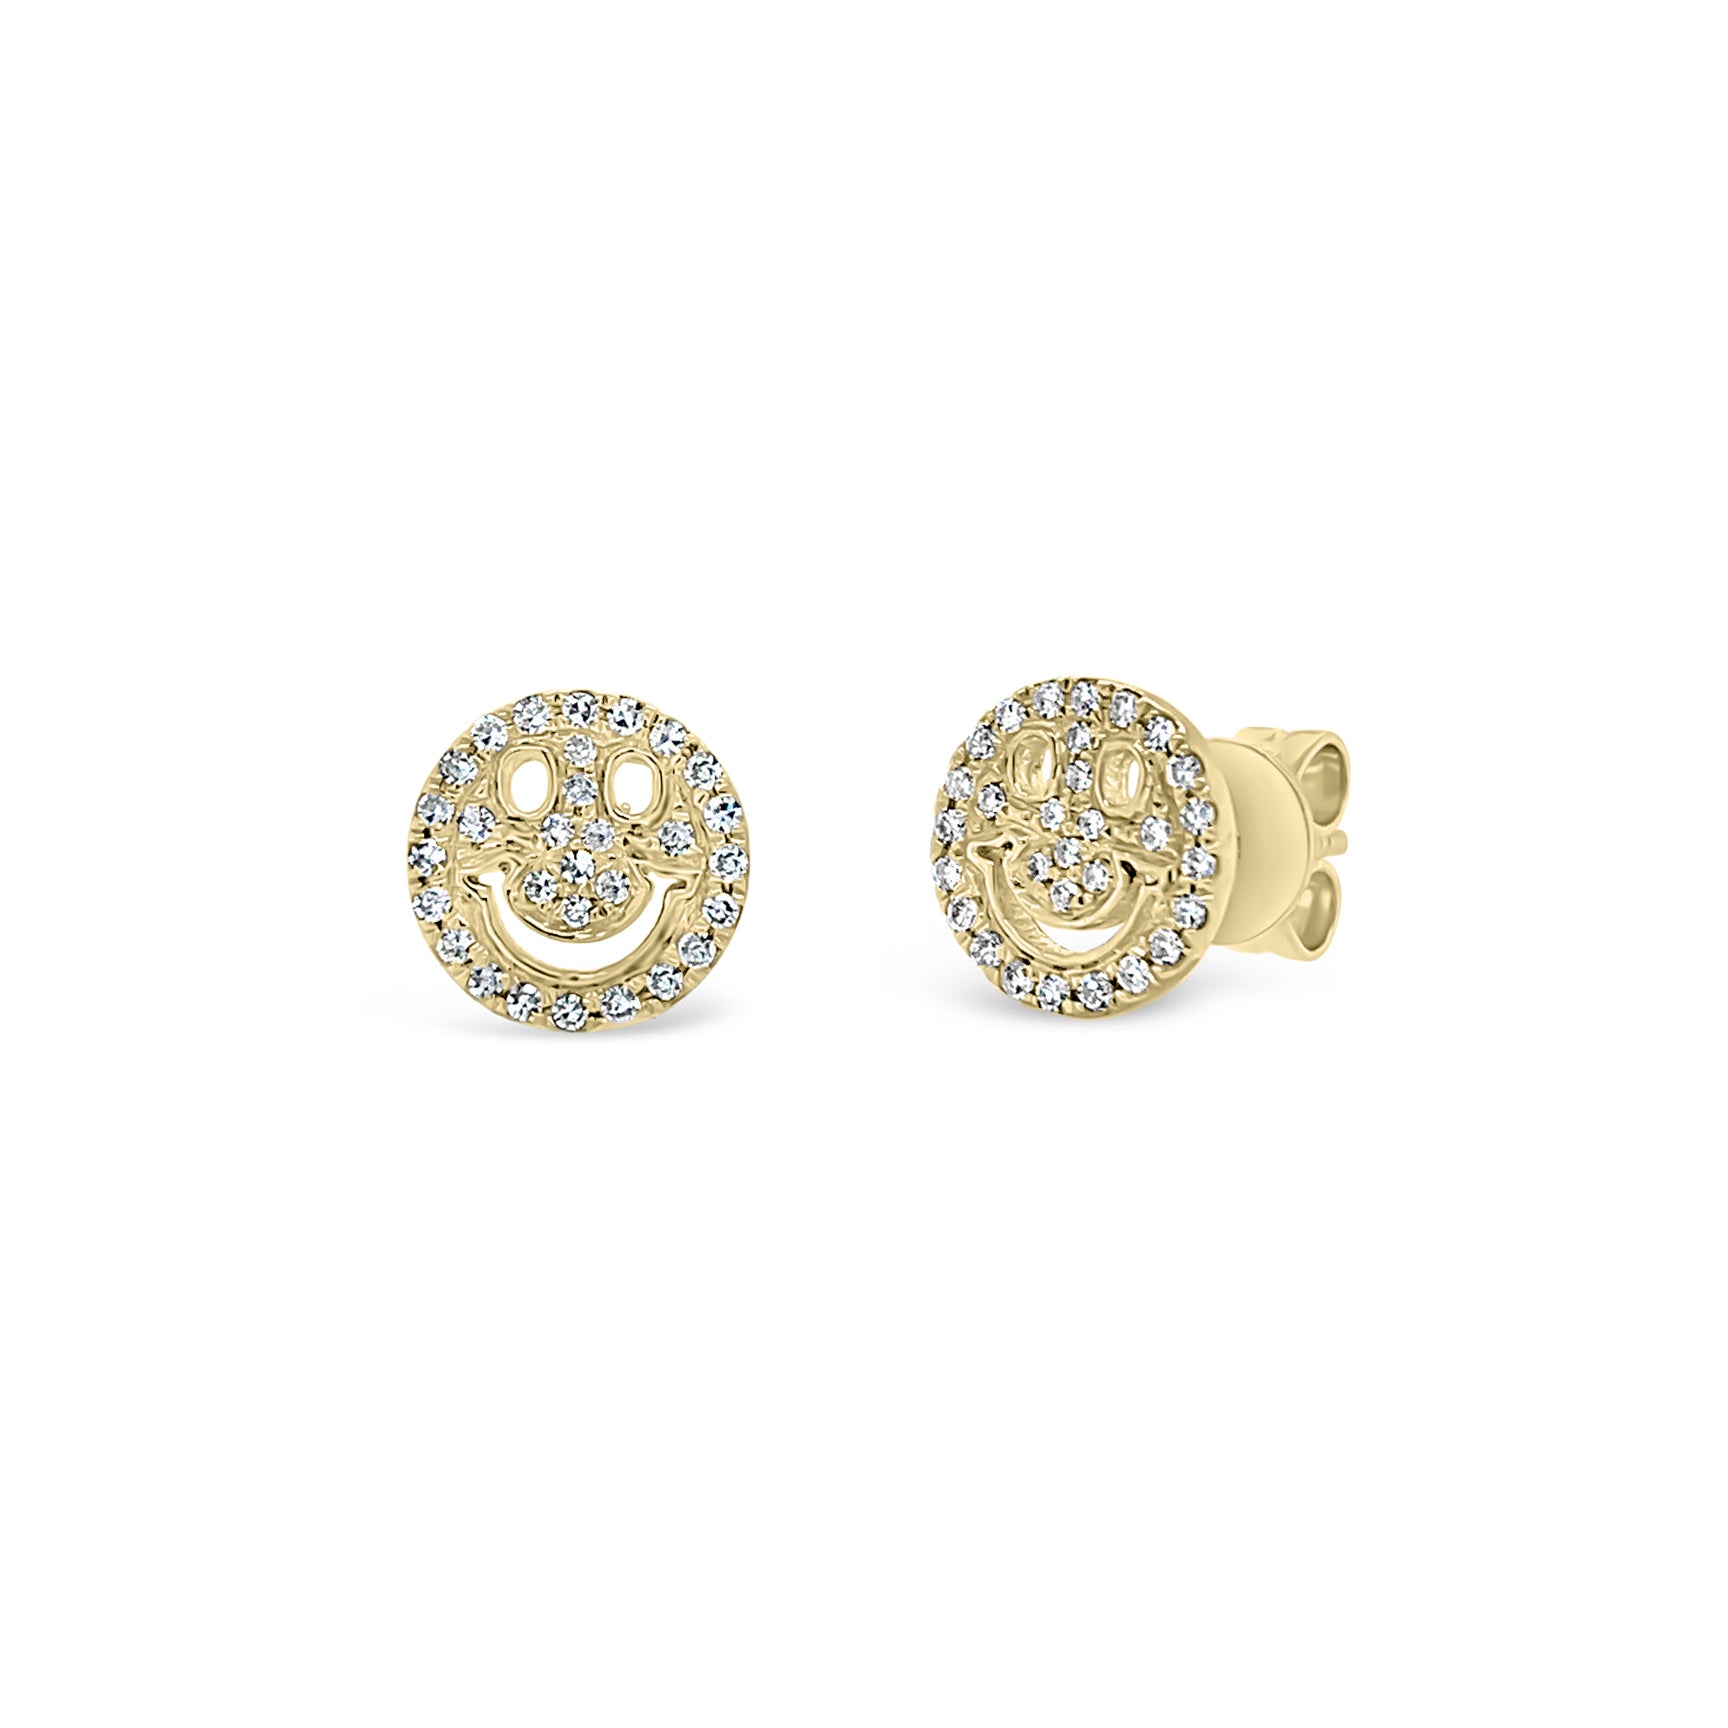 Details more than 114 large diamante stud earrings latest